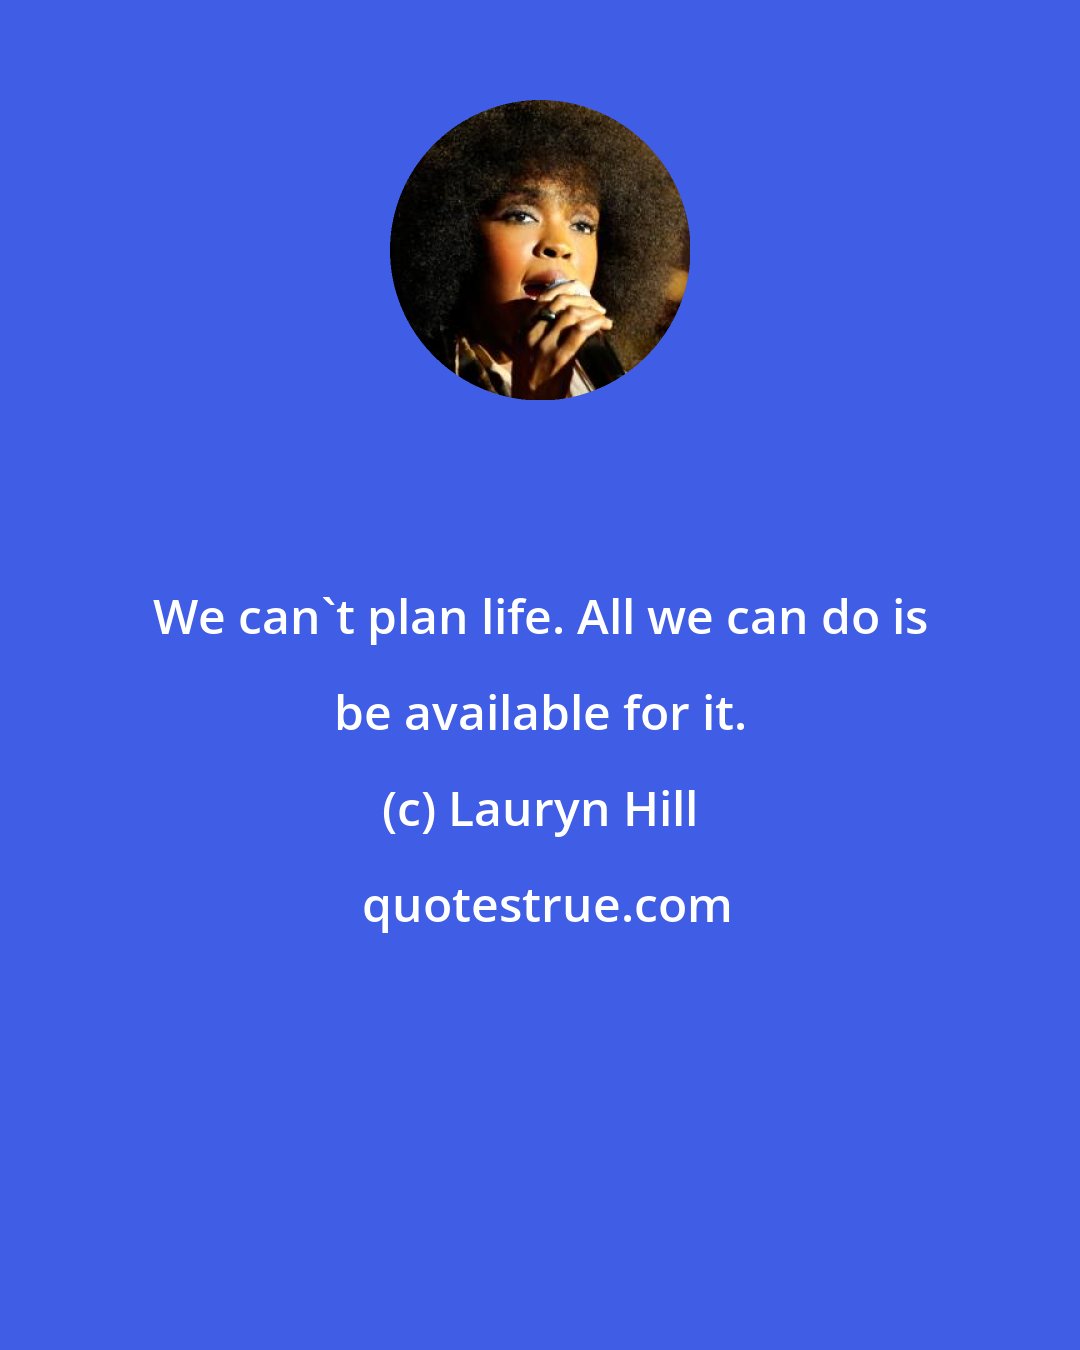 Lauryn Hill: We can't plan life. All we can do is be available for it.